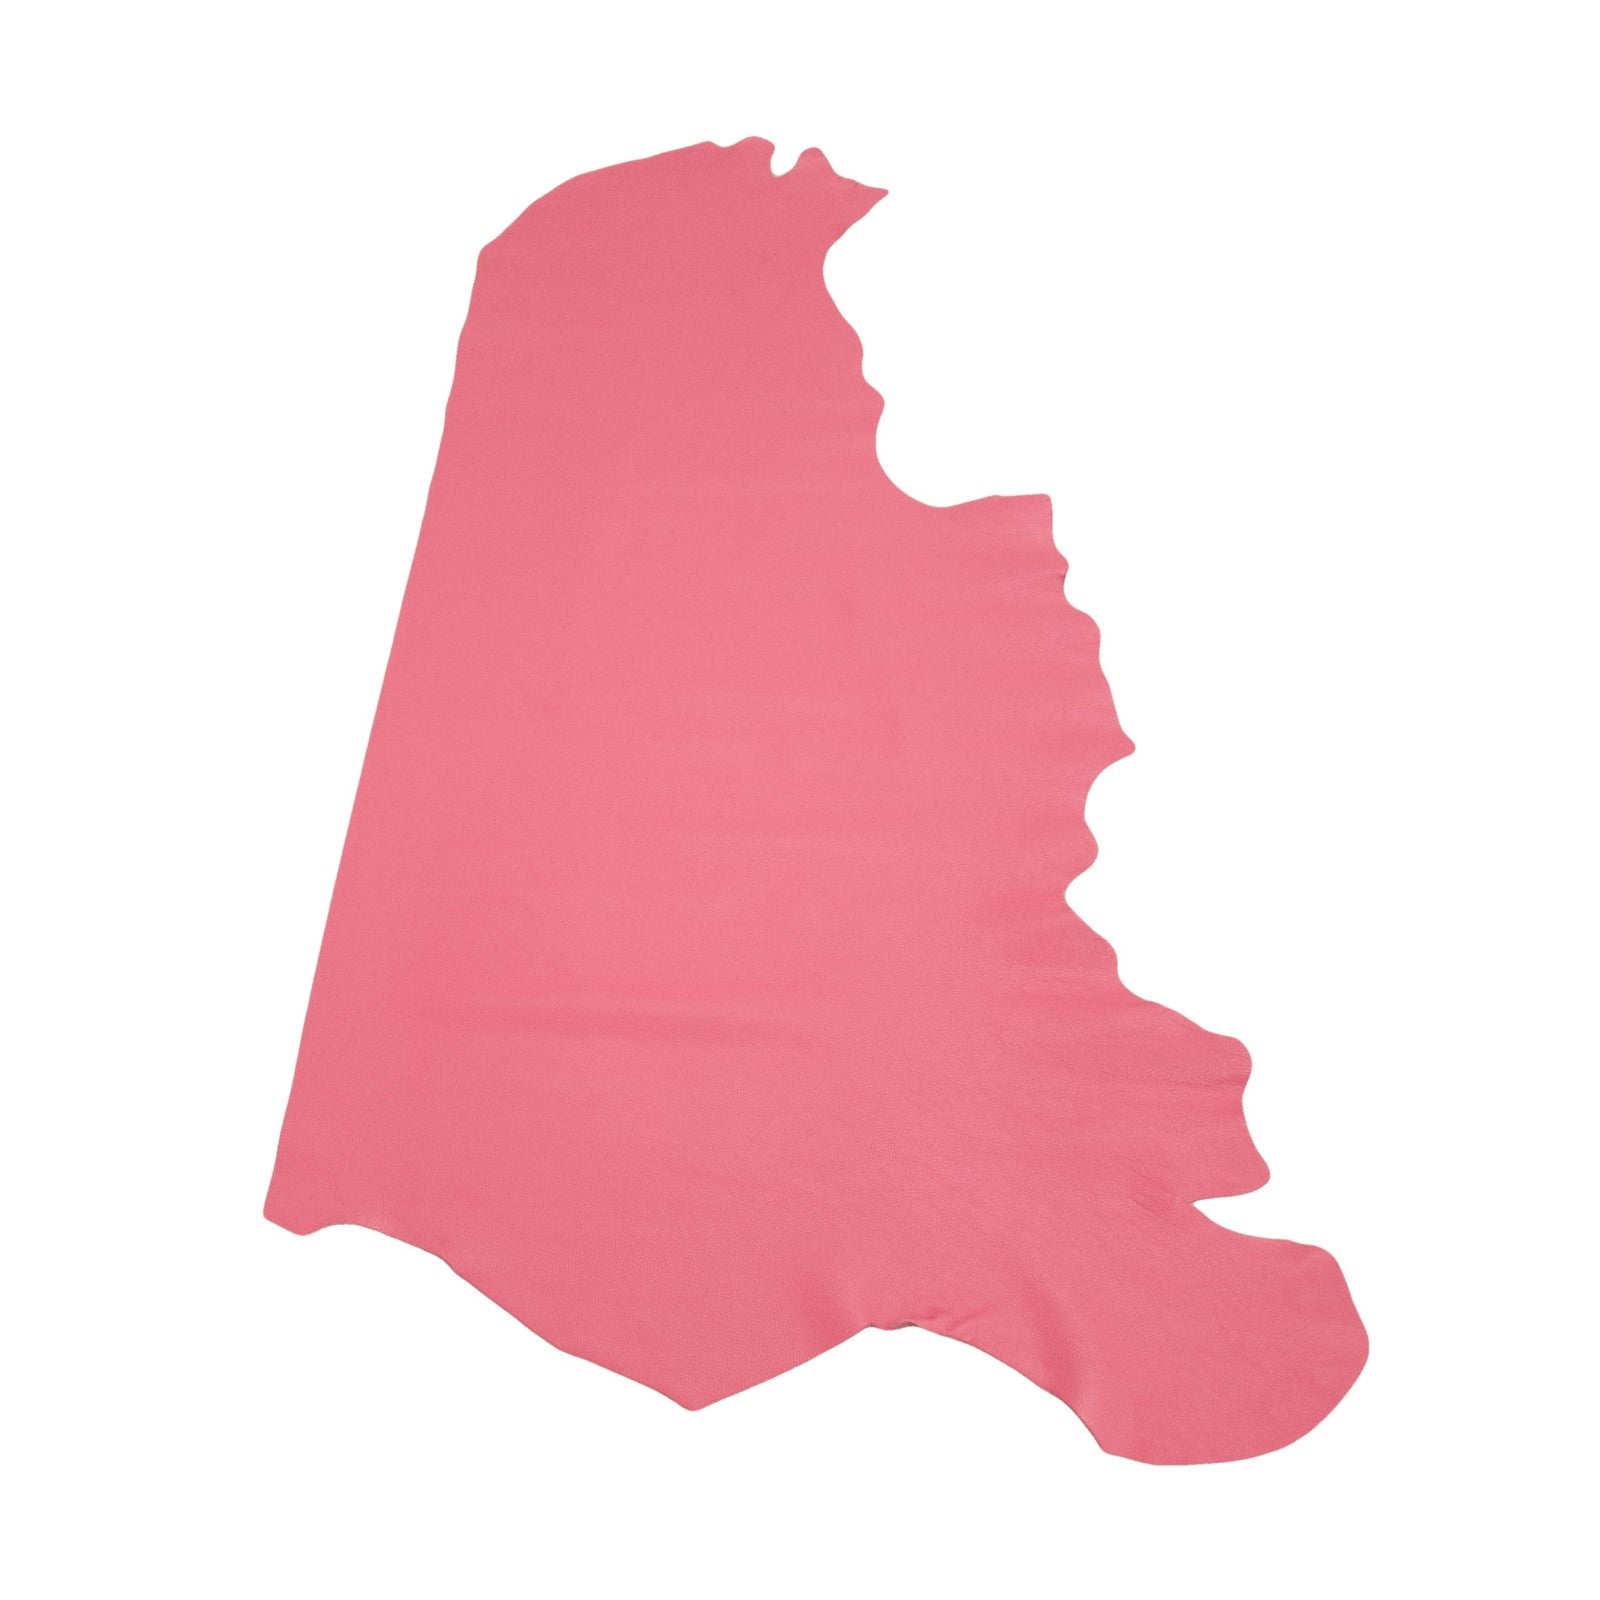 Hollywood Hot Pink Tried n True 3-4 oz Leather Cow Hides, Side / 15-17 Square Foot | The Leather Guy